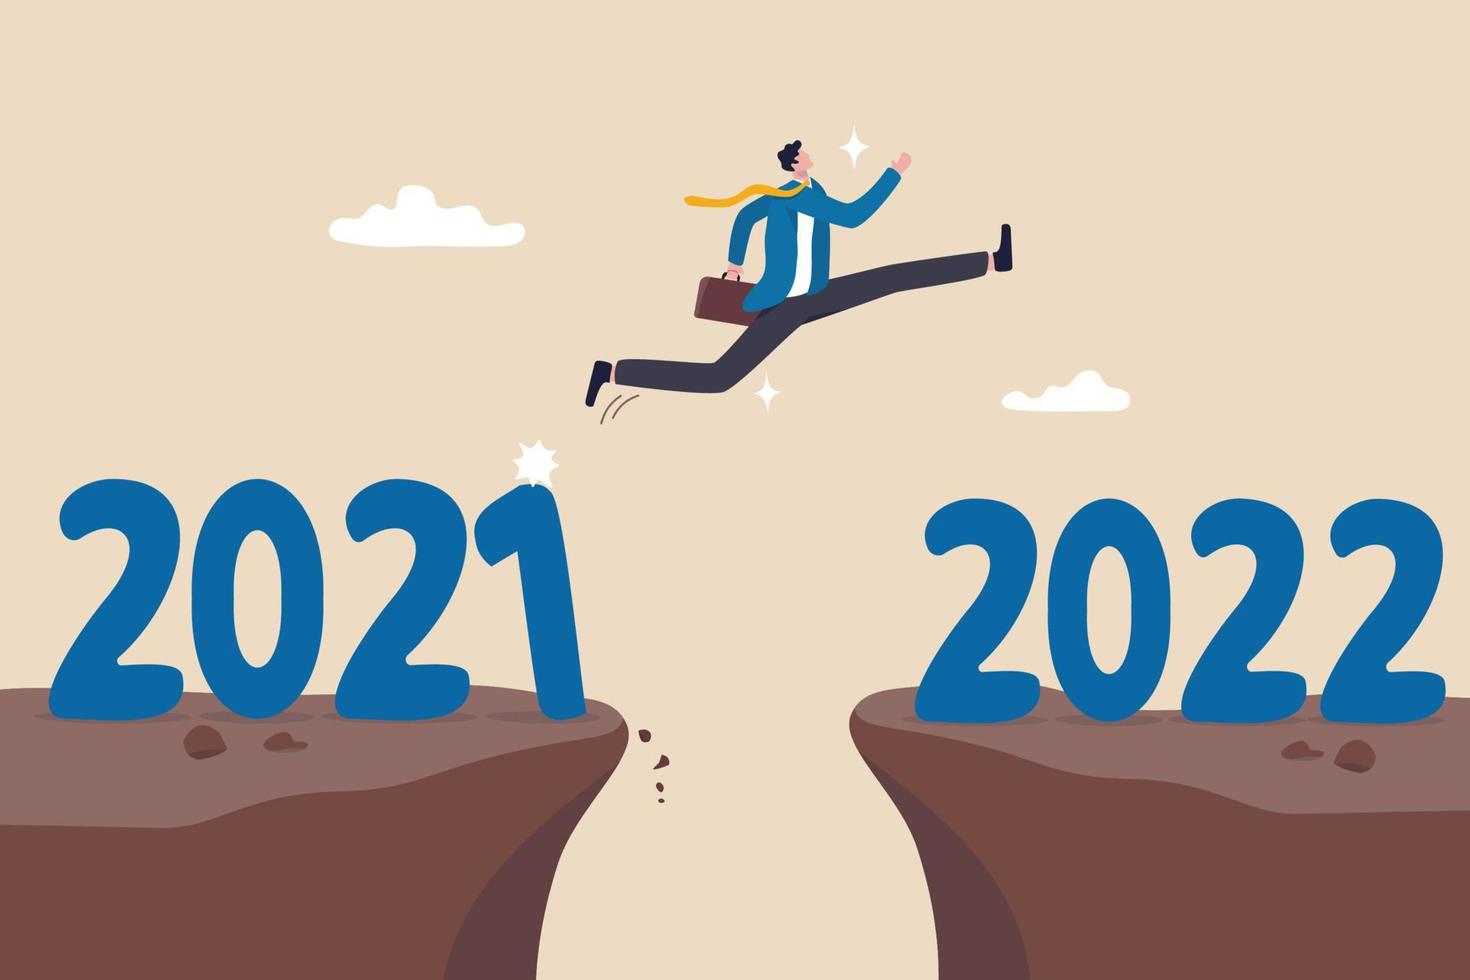 Year 2022 hope, new year resolution or success opportunity, change to new business bright future, overcome business difficulty concept, ambitious businessman jump over year gap from 2021 to 2022. vector